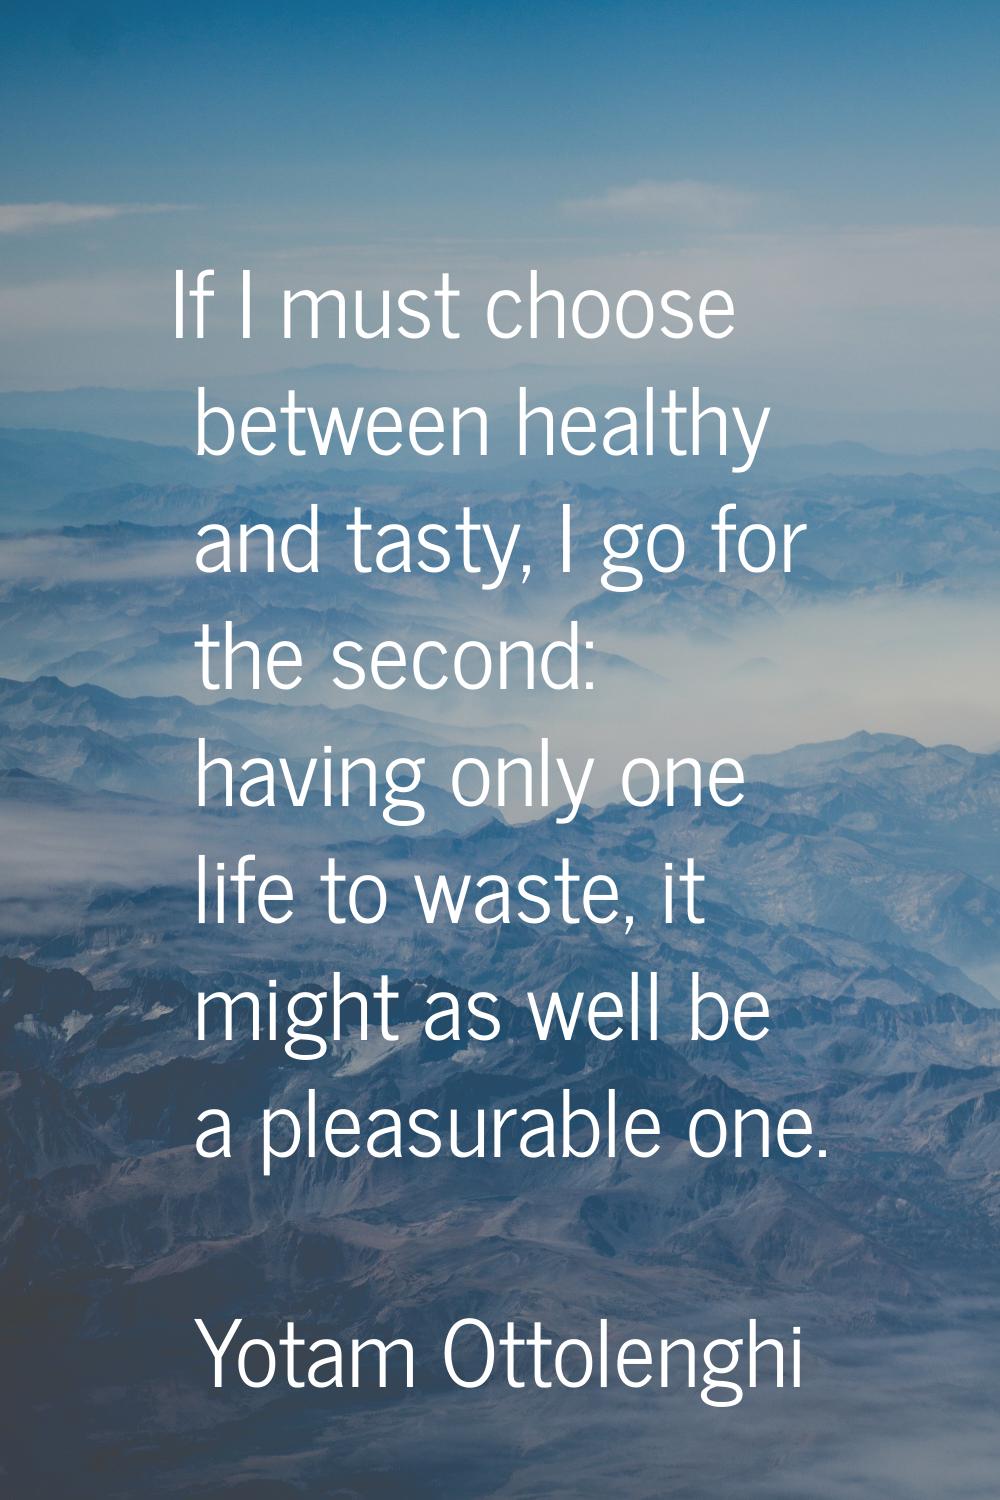 If I must choose between healthy and tasty, I go for the second: having only one life to waste, it 